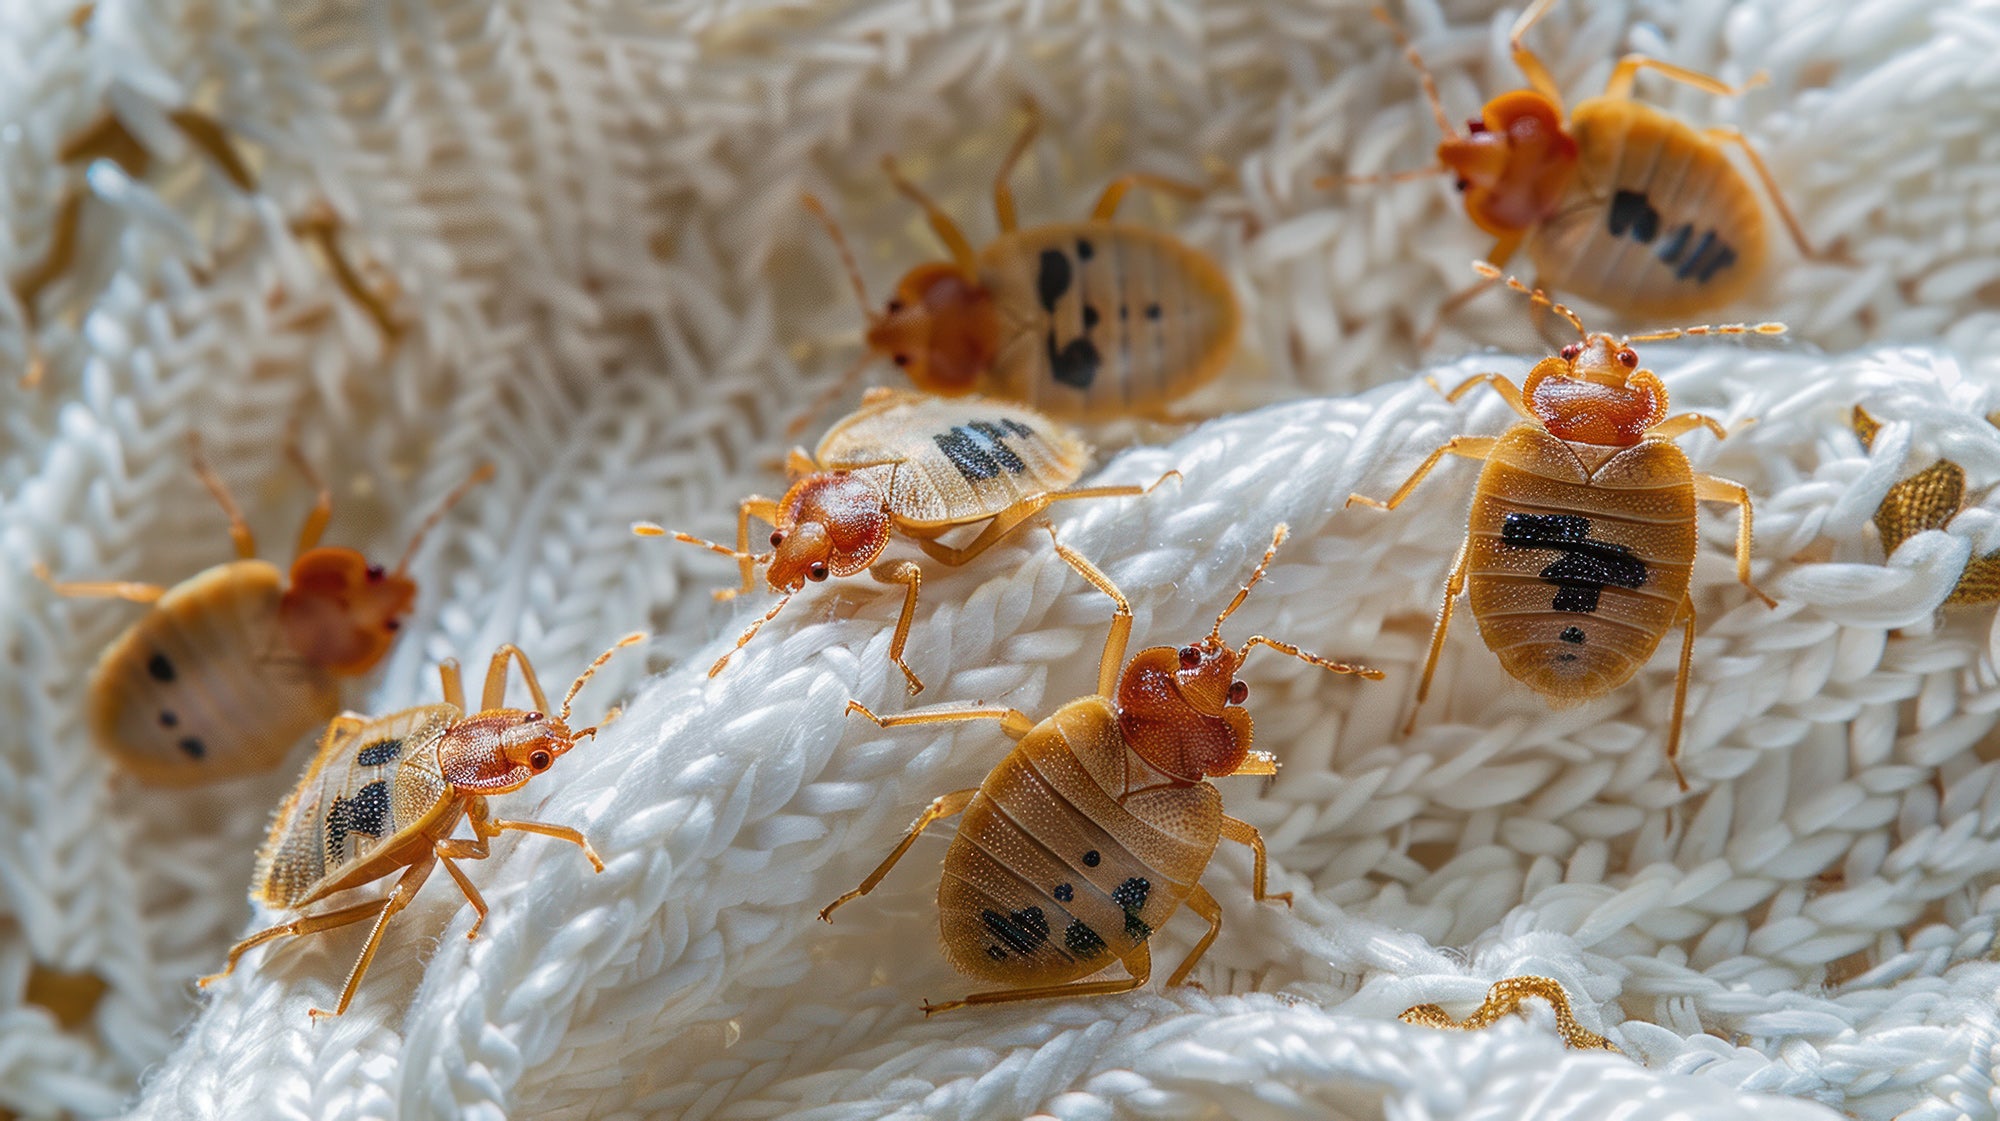 Bed Bugs Close Up on Blanket